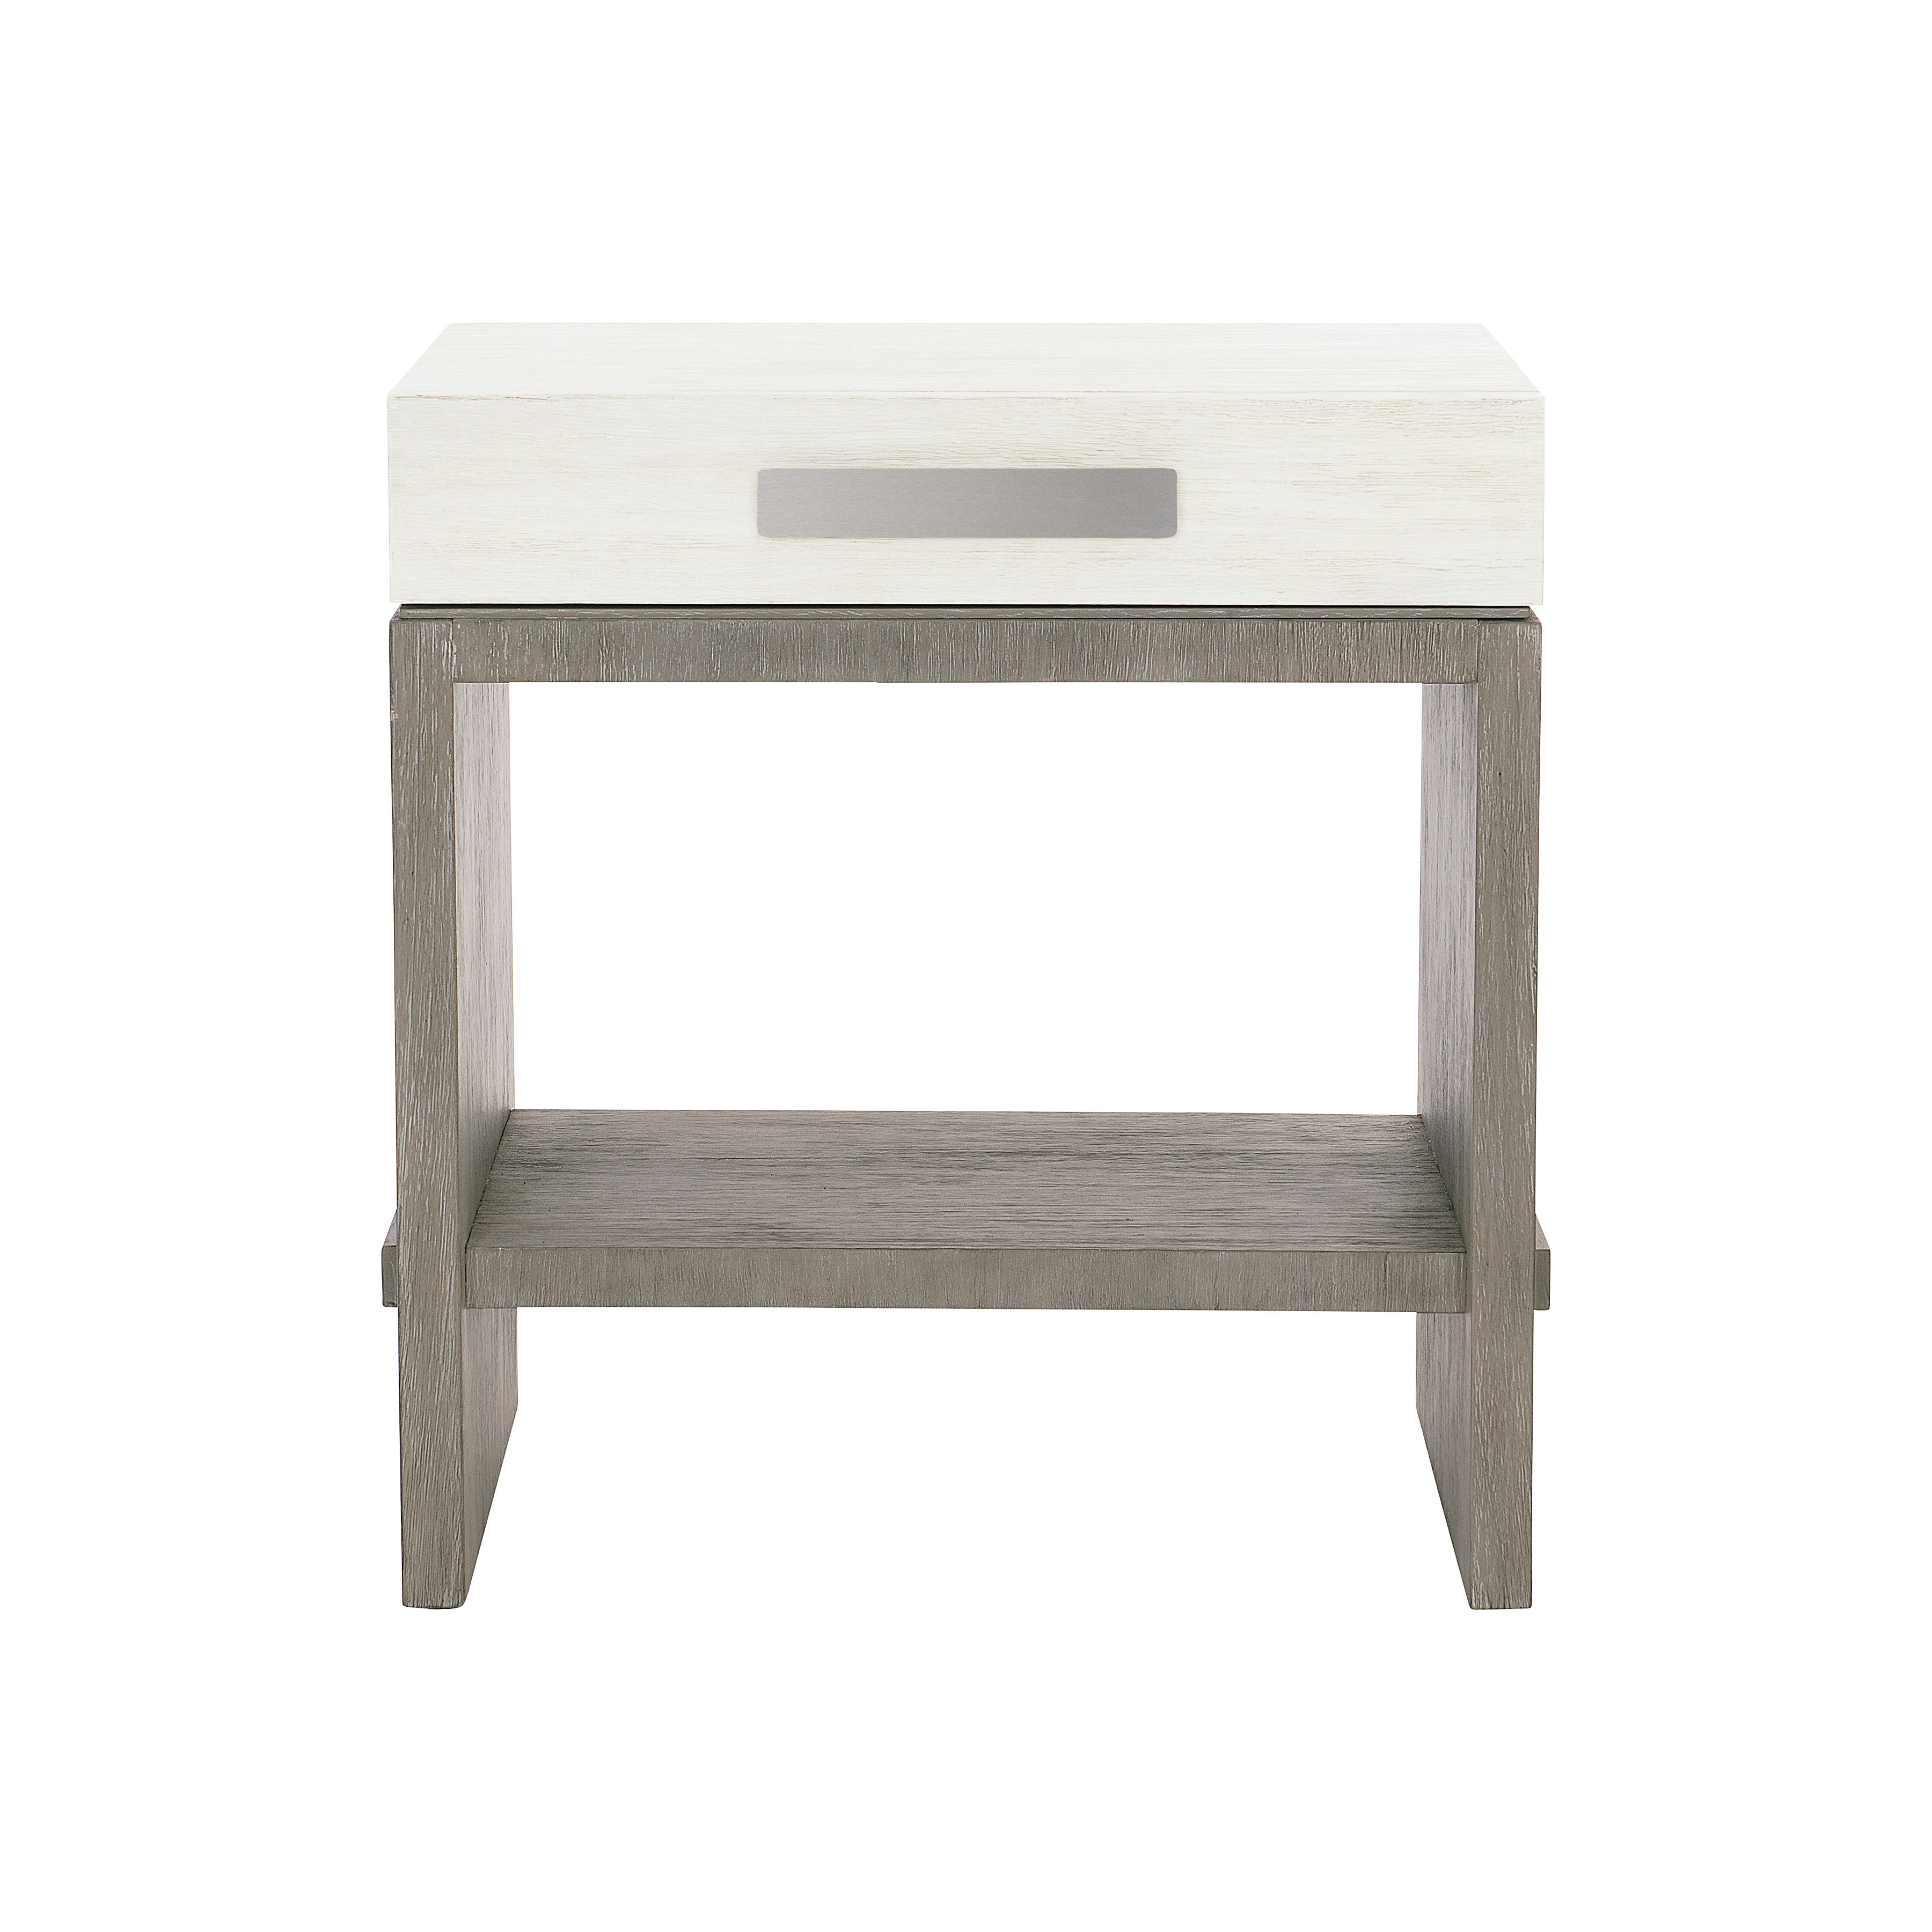 Foundations Nightstand in Light Shale Finish